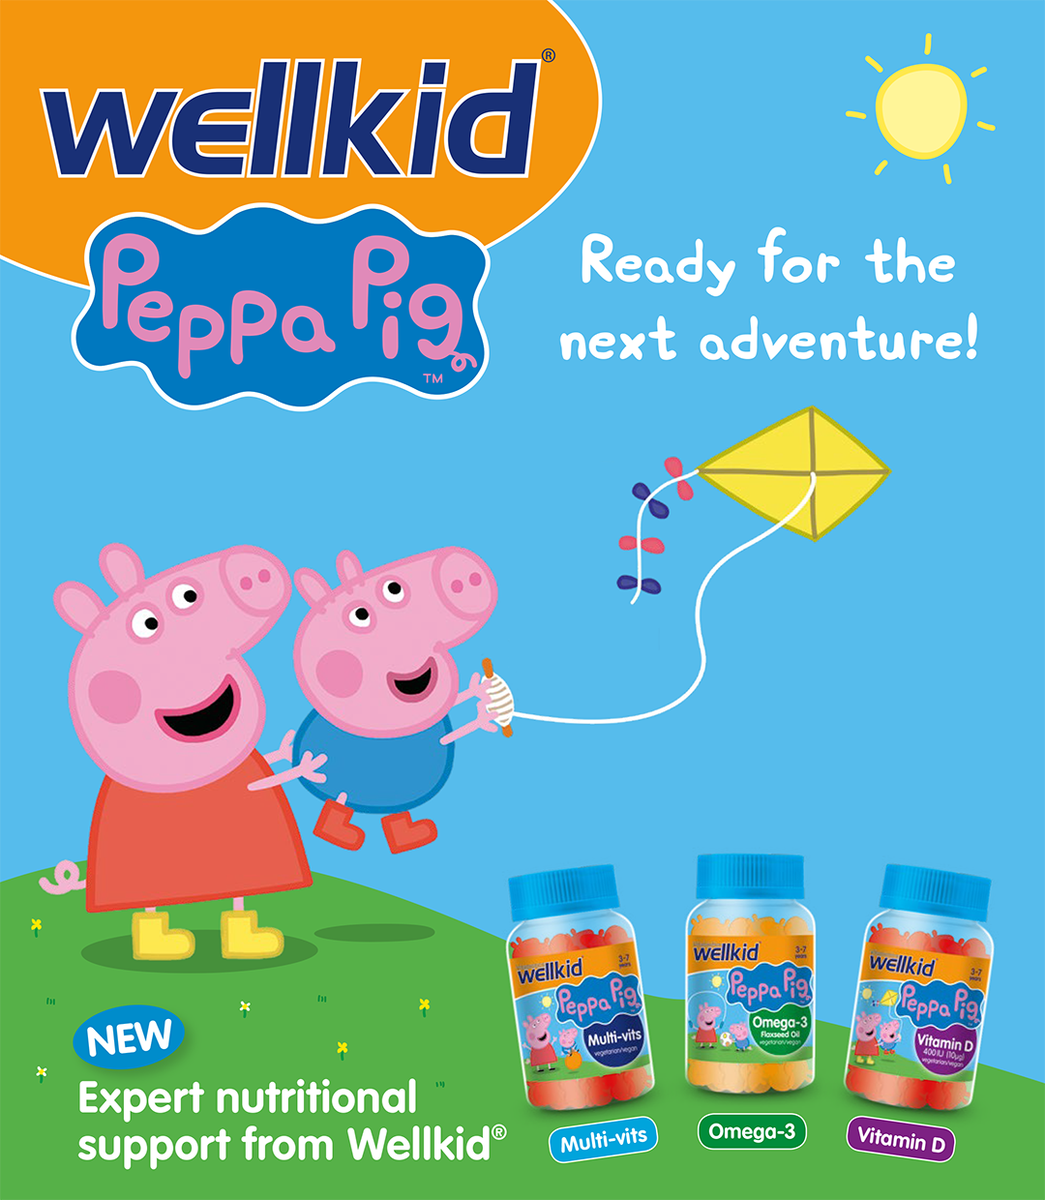 Vitabiotics We Re Ready For The Next Adventure With Our New Lovely And Yummy Wellkid Peppa Pig Vitamins For Children Aged Between 3 7 Years Coming Soon Wellkidpeppapig Wellkid Vitabiotics